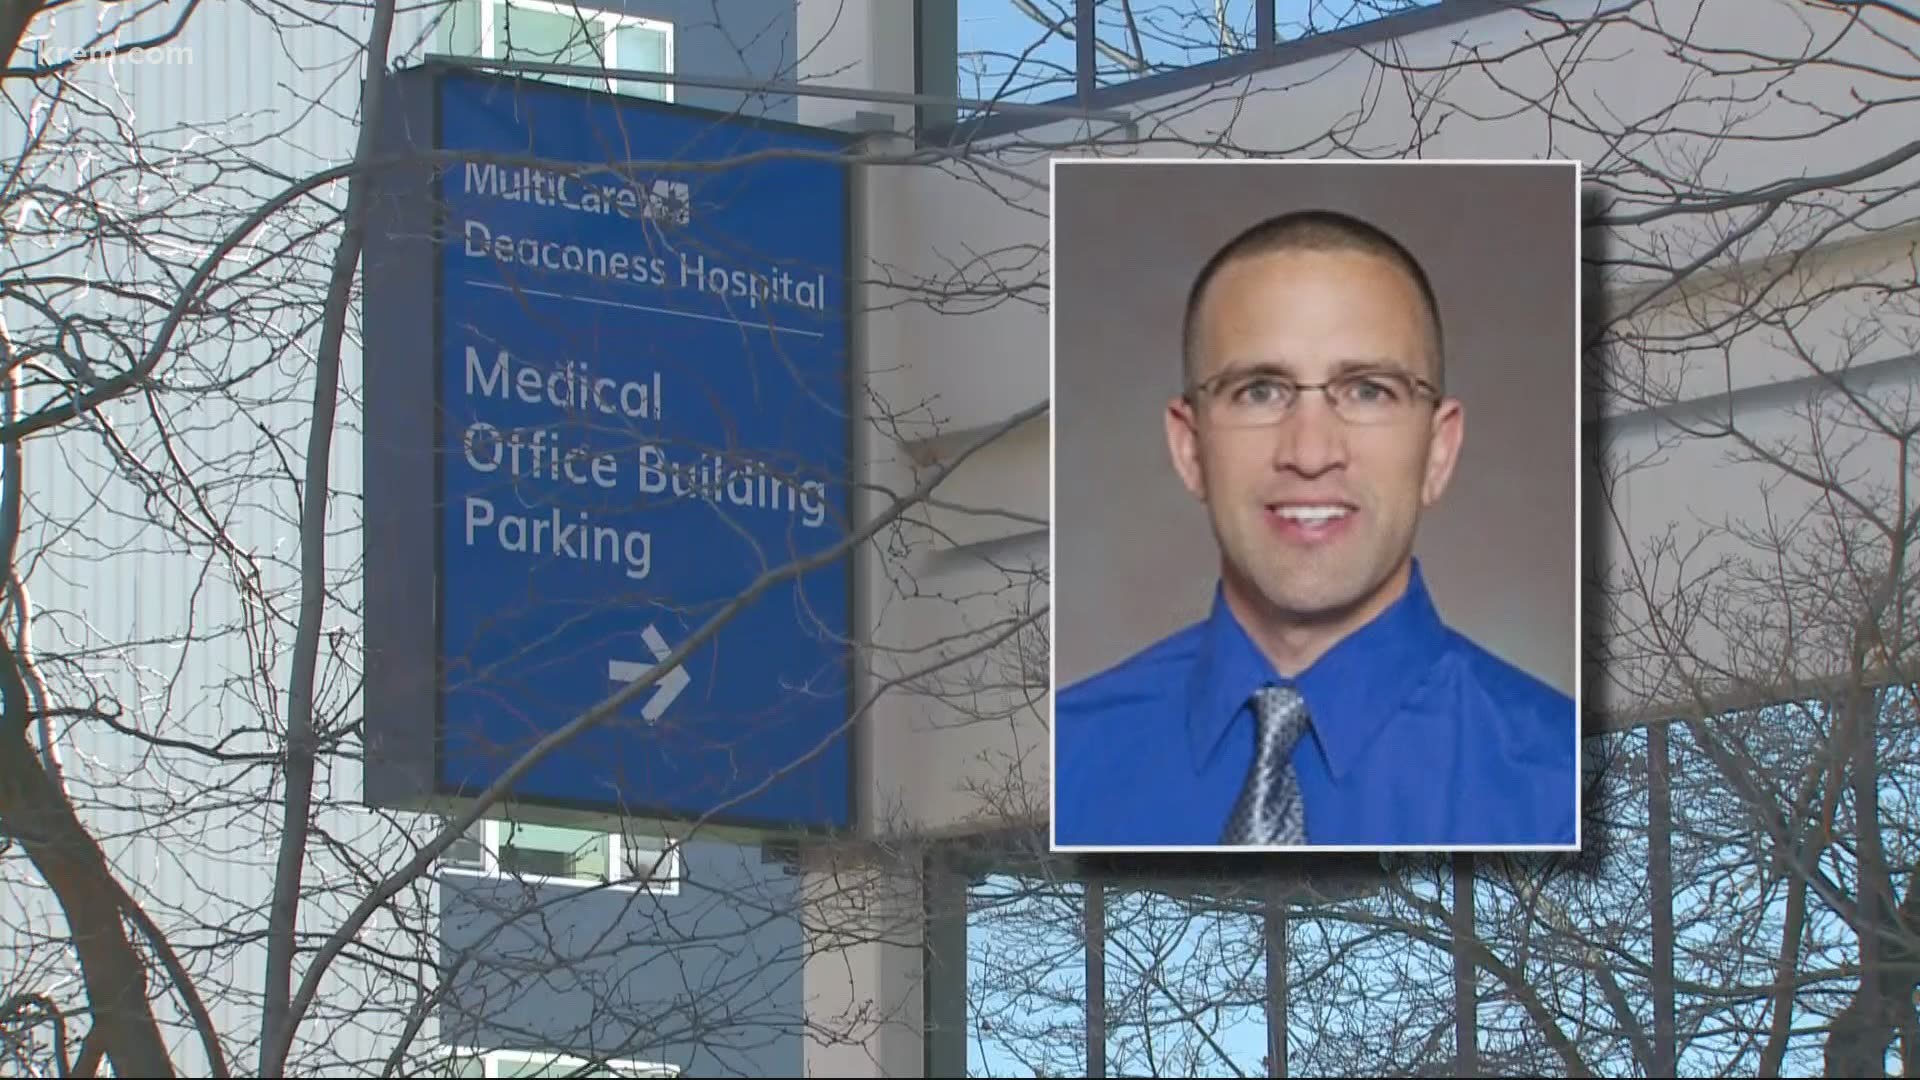 Dr. Dreyer is accused of pushing for extensive and unnecessary spine surgeries on patients for financial gain.